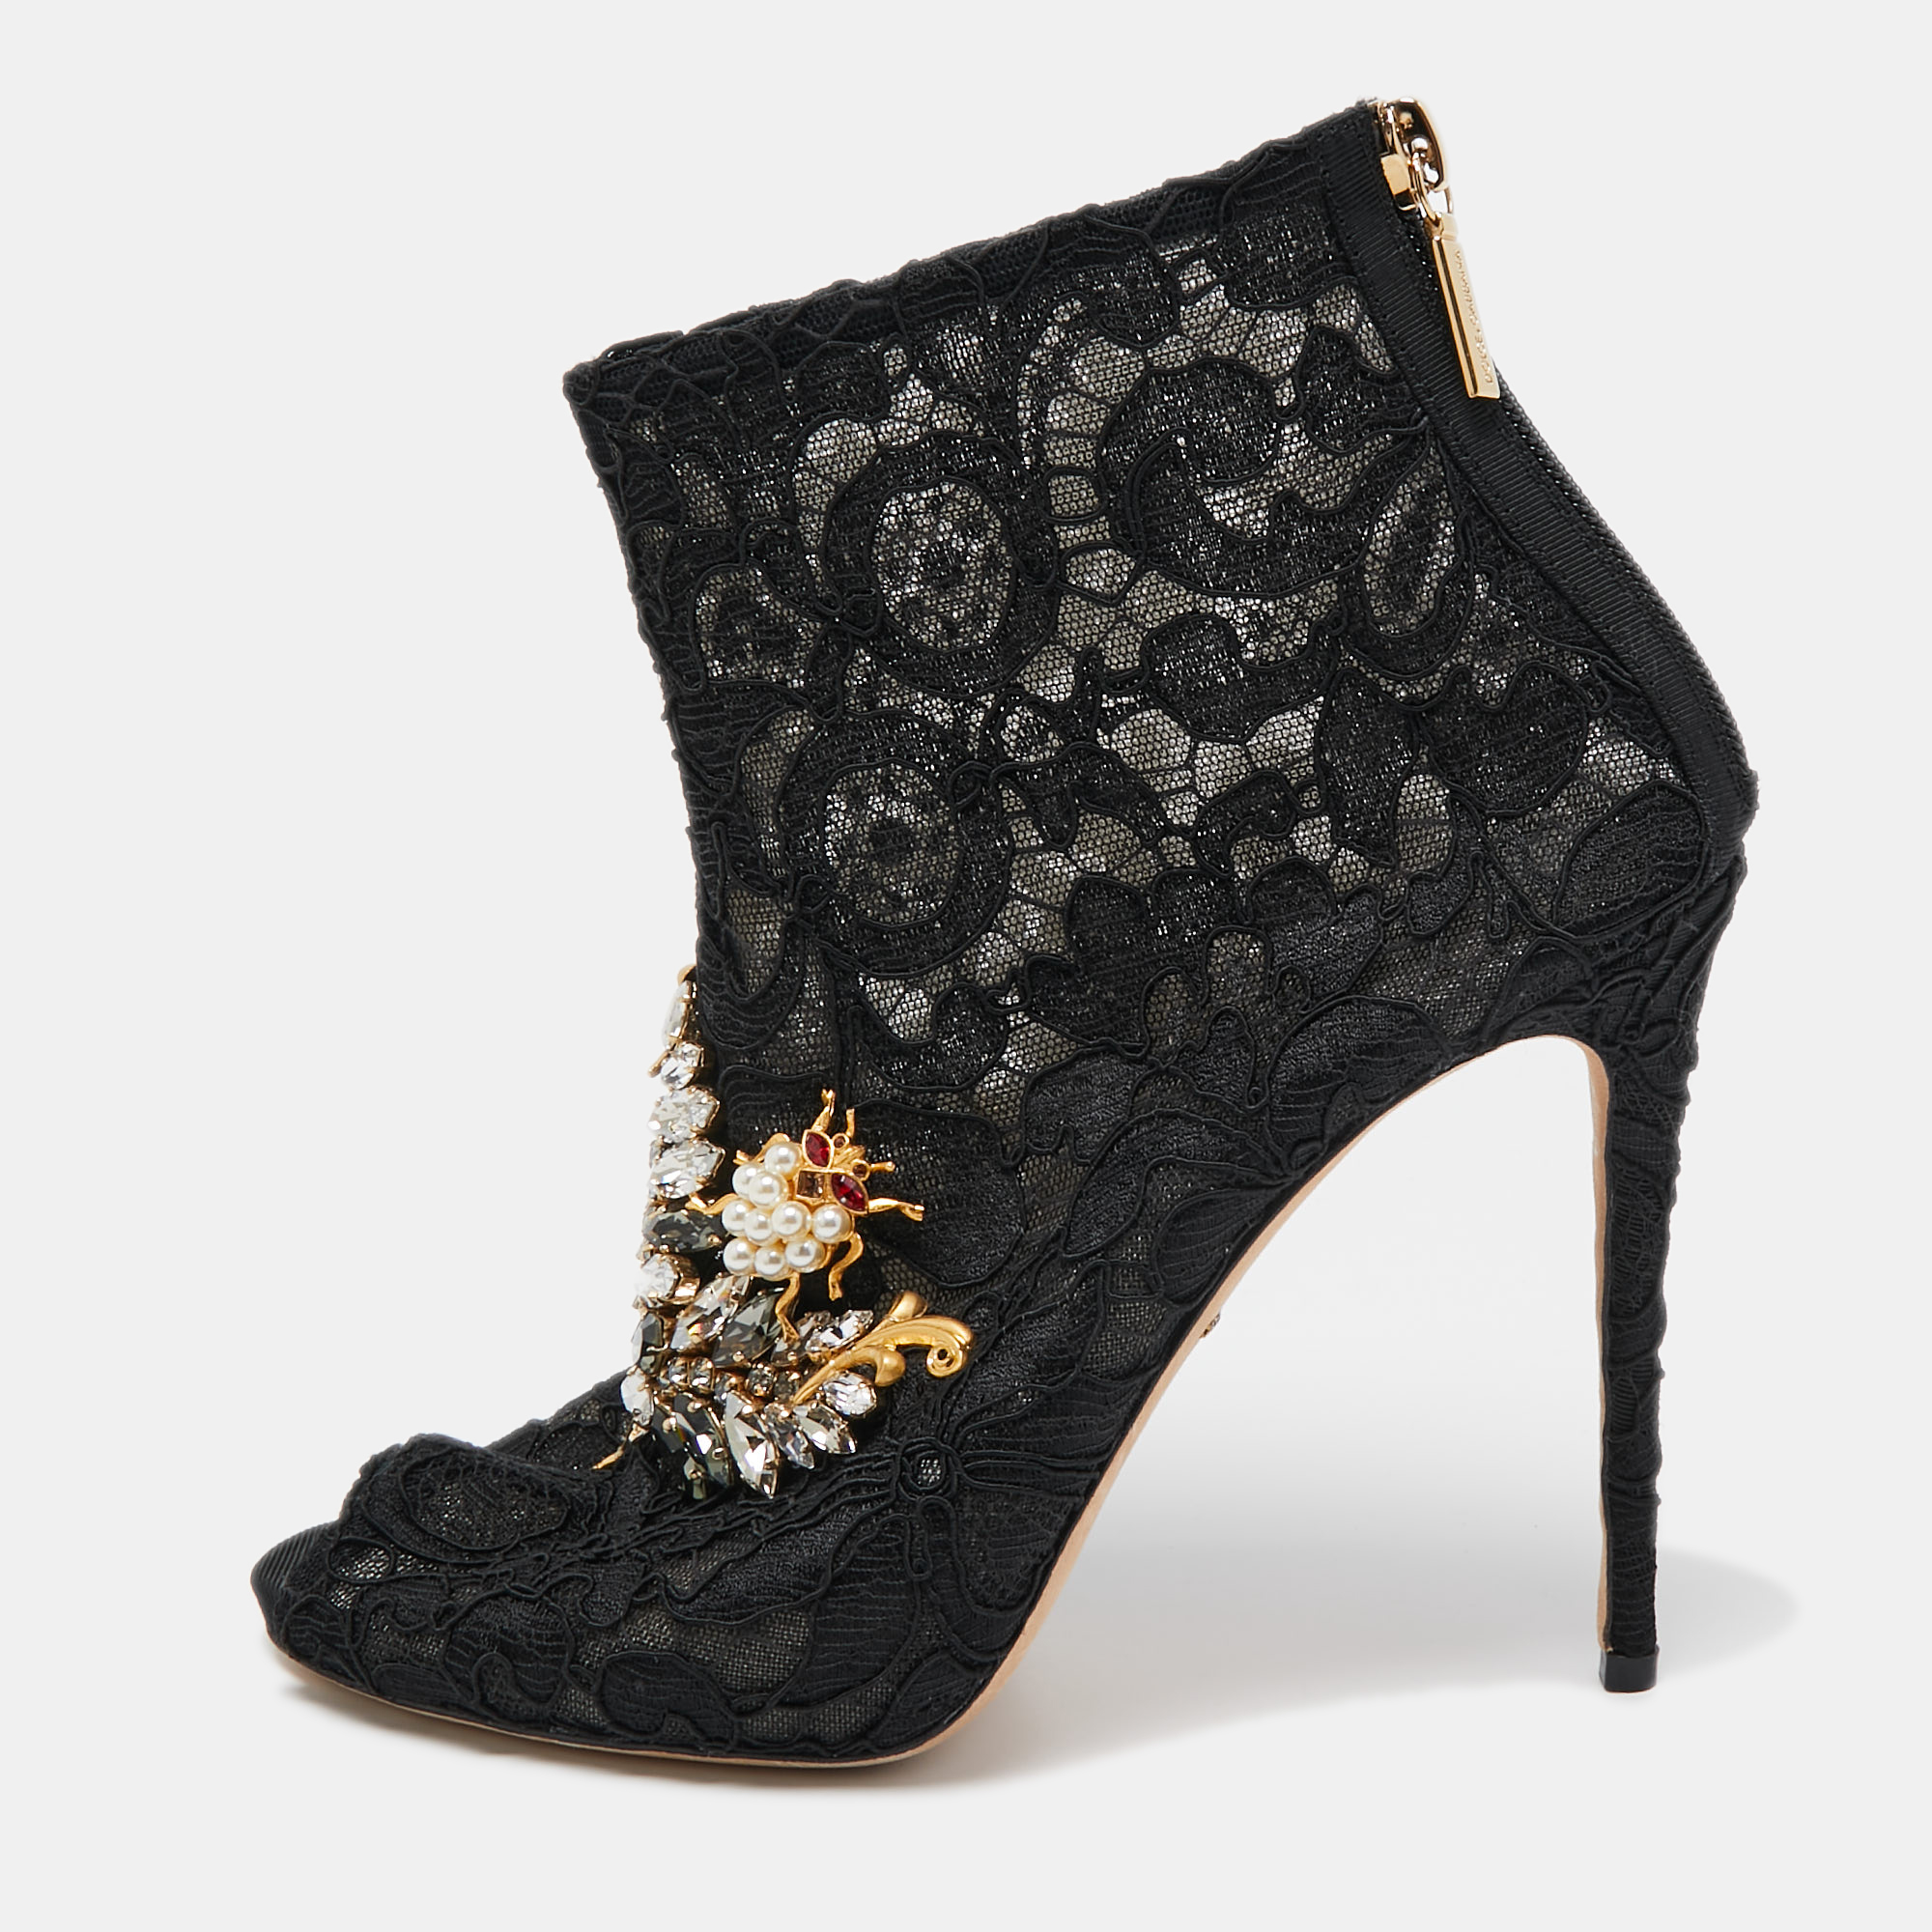 Pre-owned Dolce & Gabbana Black Lace Crystal Embellished Peep Toe Booties Size 37.5